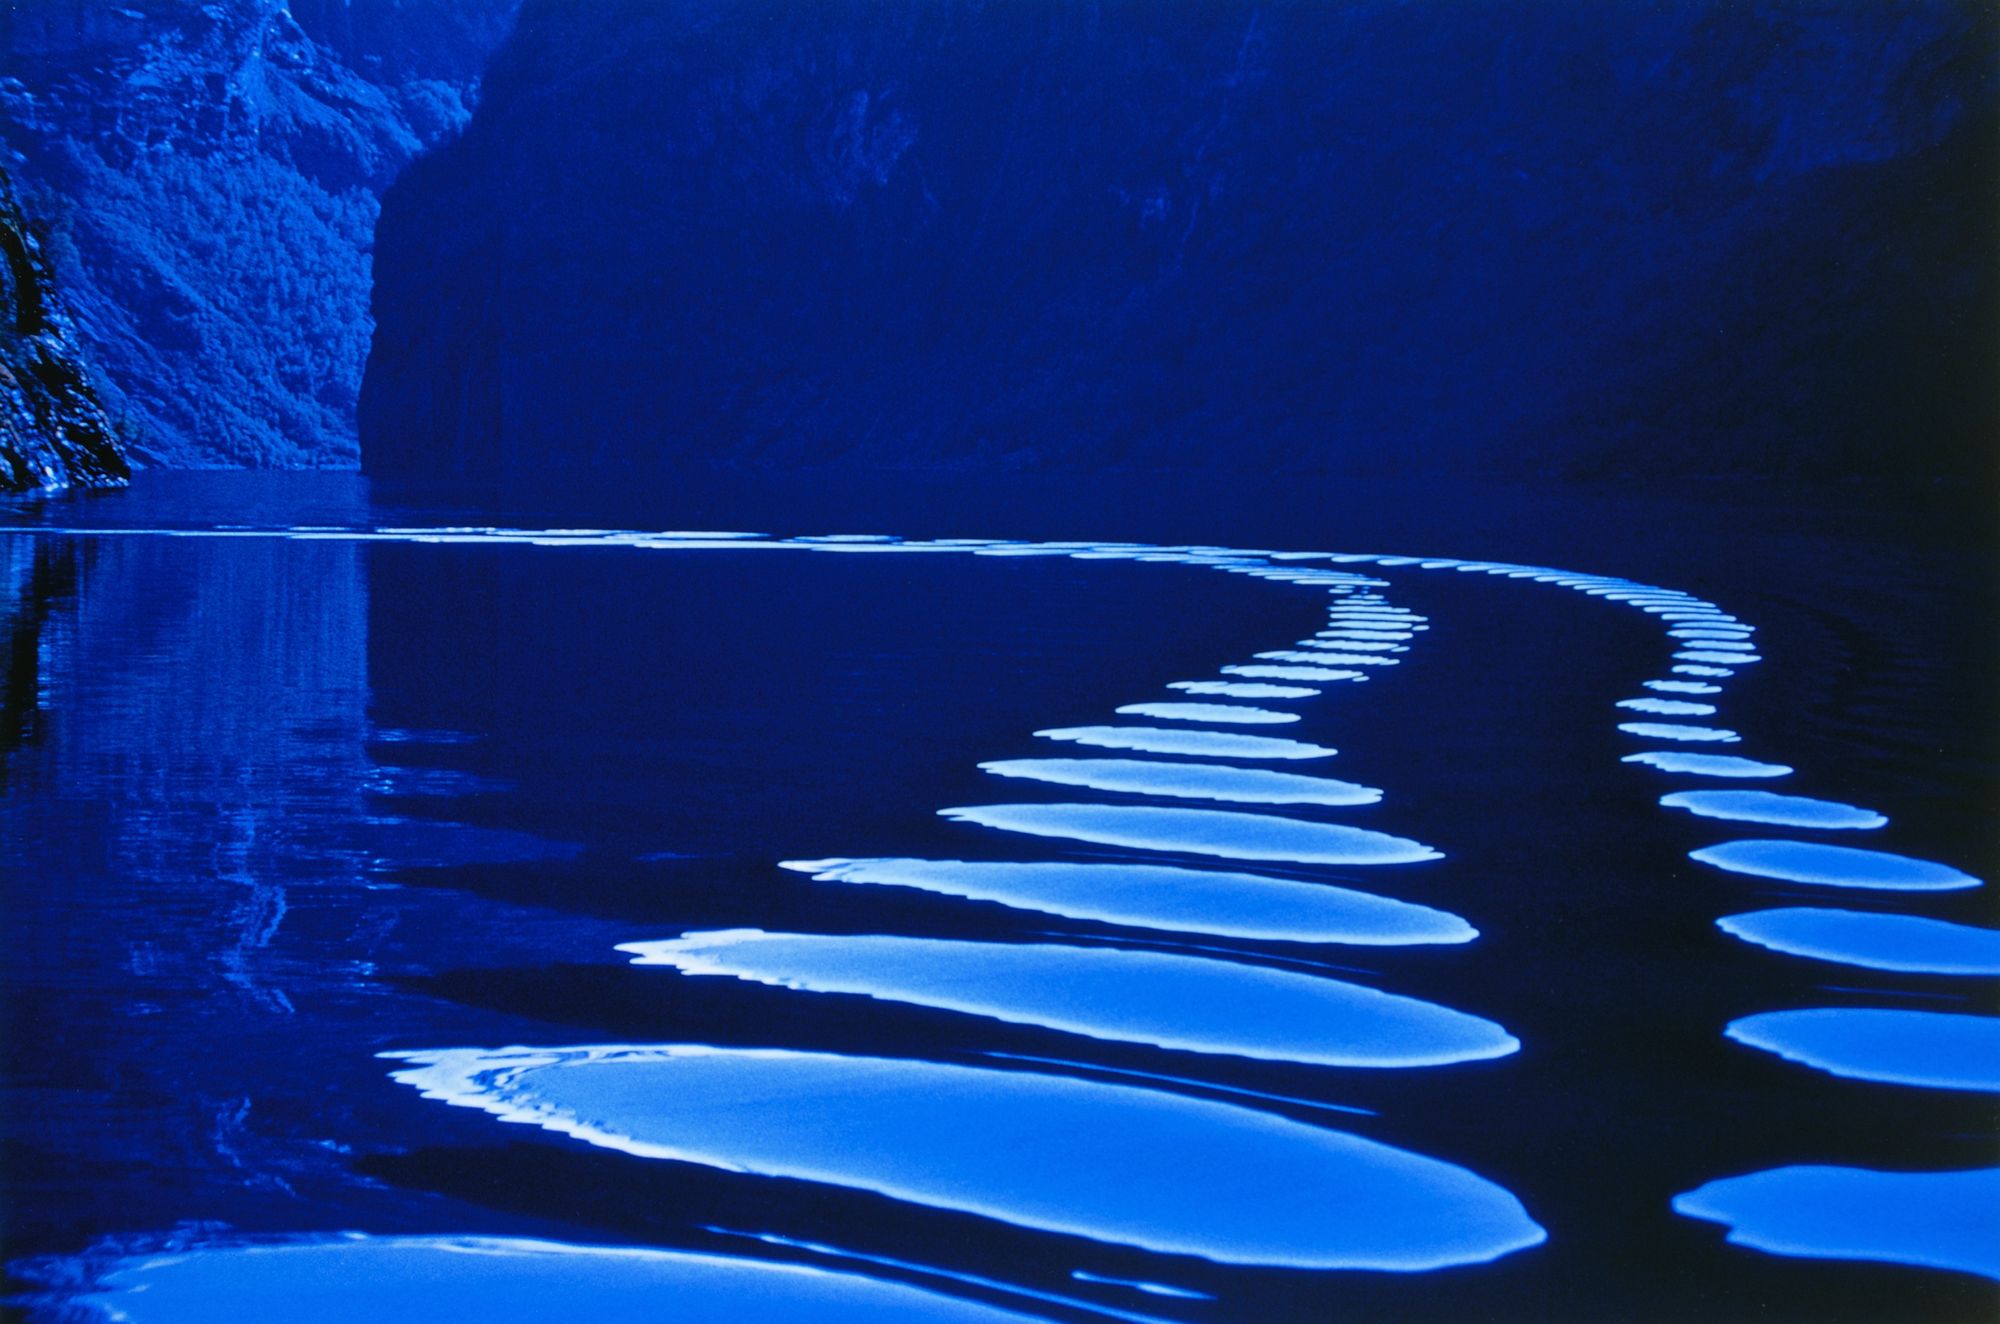 Learning from Pete Turner